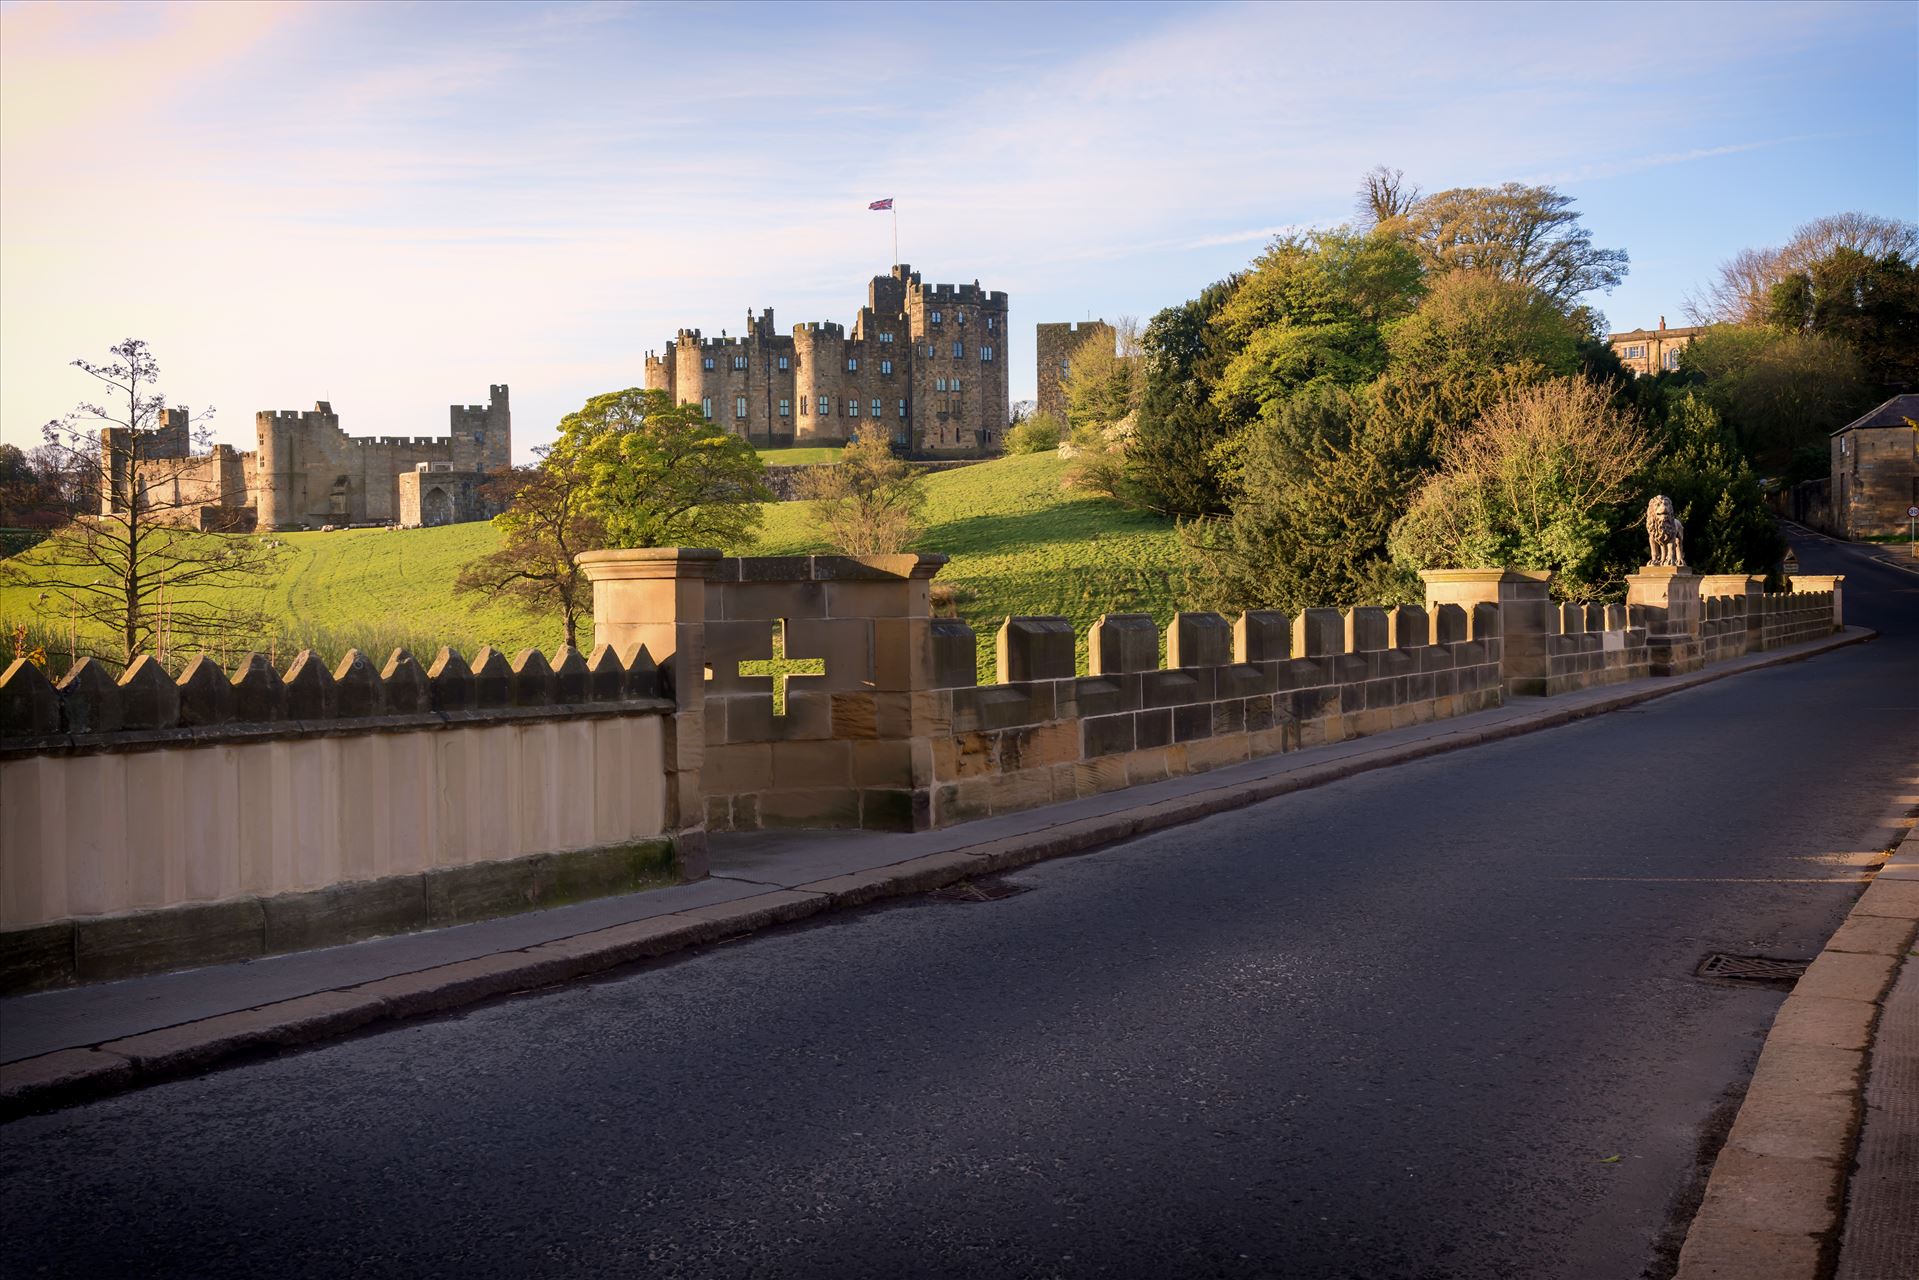 Alnwick Castle, Northumberland The castle sits on the River Aln in the rural town of Alnwick & has been the setting for a number of movies, possibly the most remembered is Harry Potter. The castle is occupied by the current Duke of Northumberland & his family. by philreay